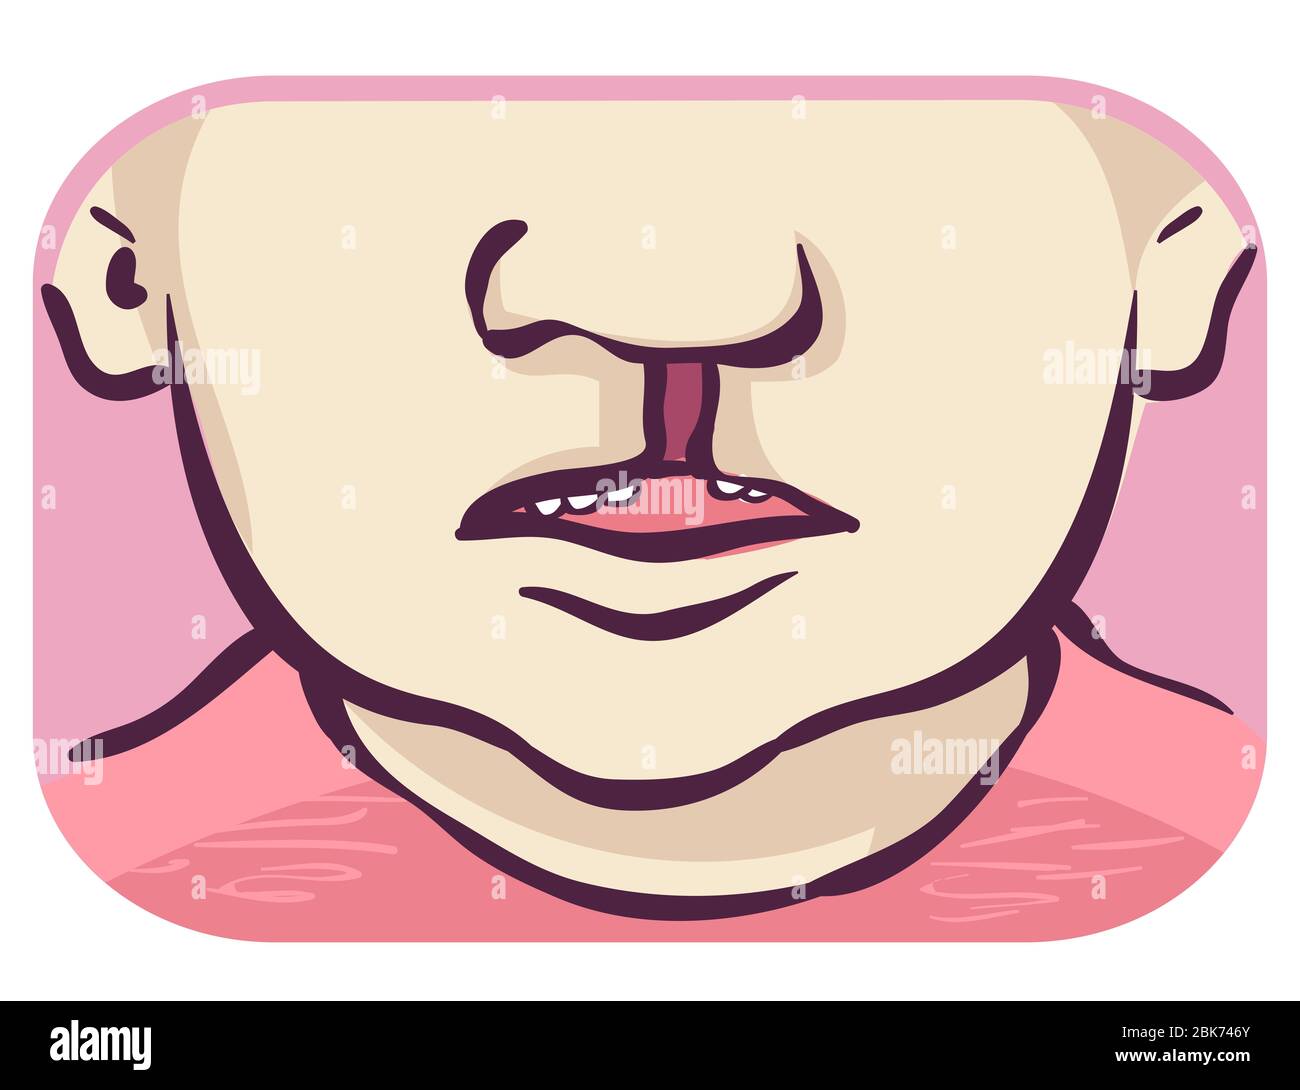 Illustration of a Young Face with Unilateral Cleft Lip with Cleft Palate Stock Photo